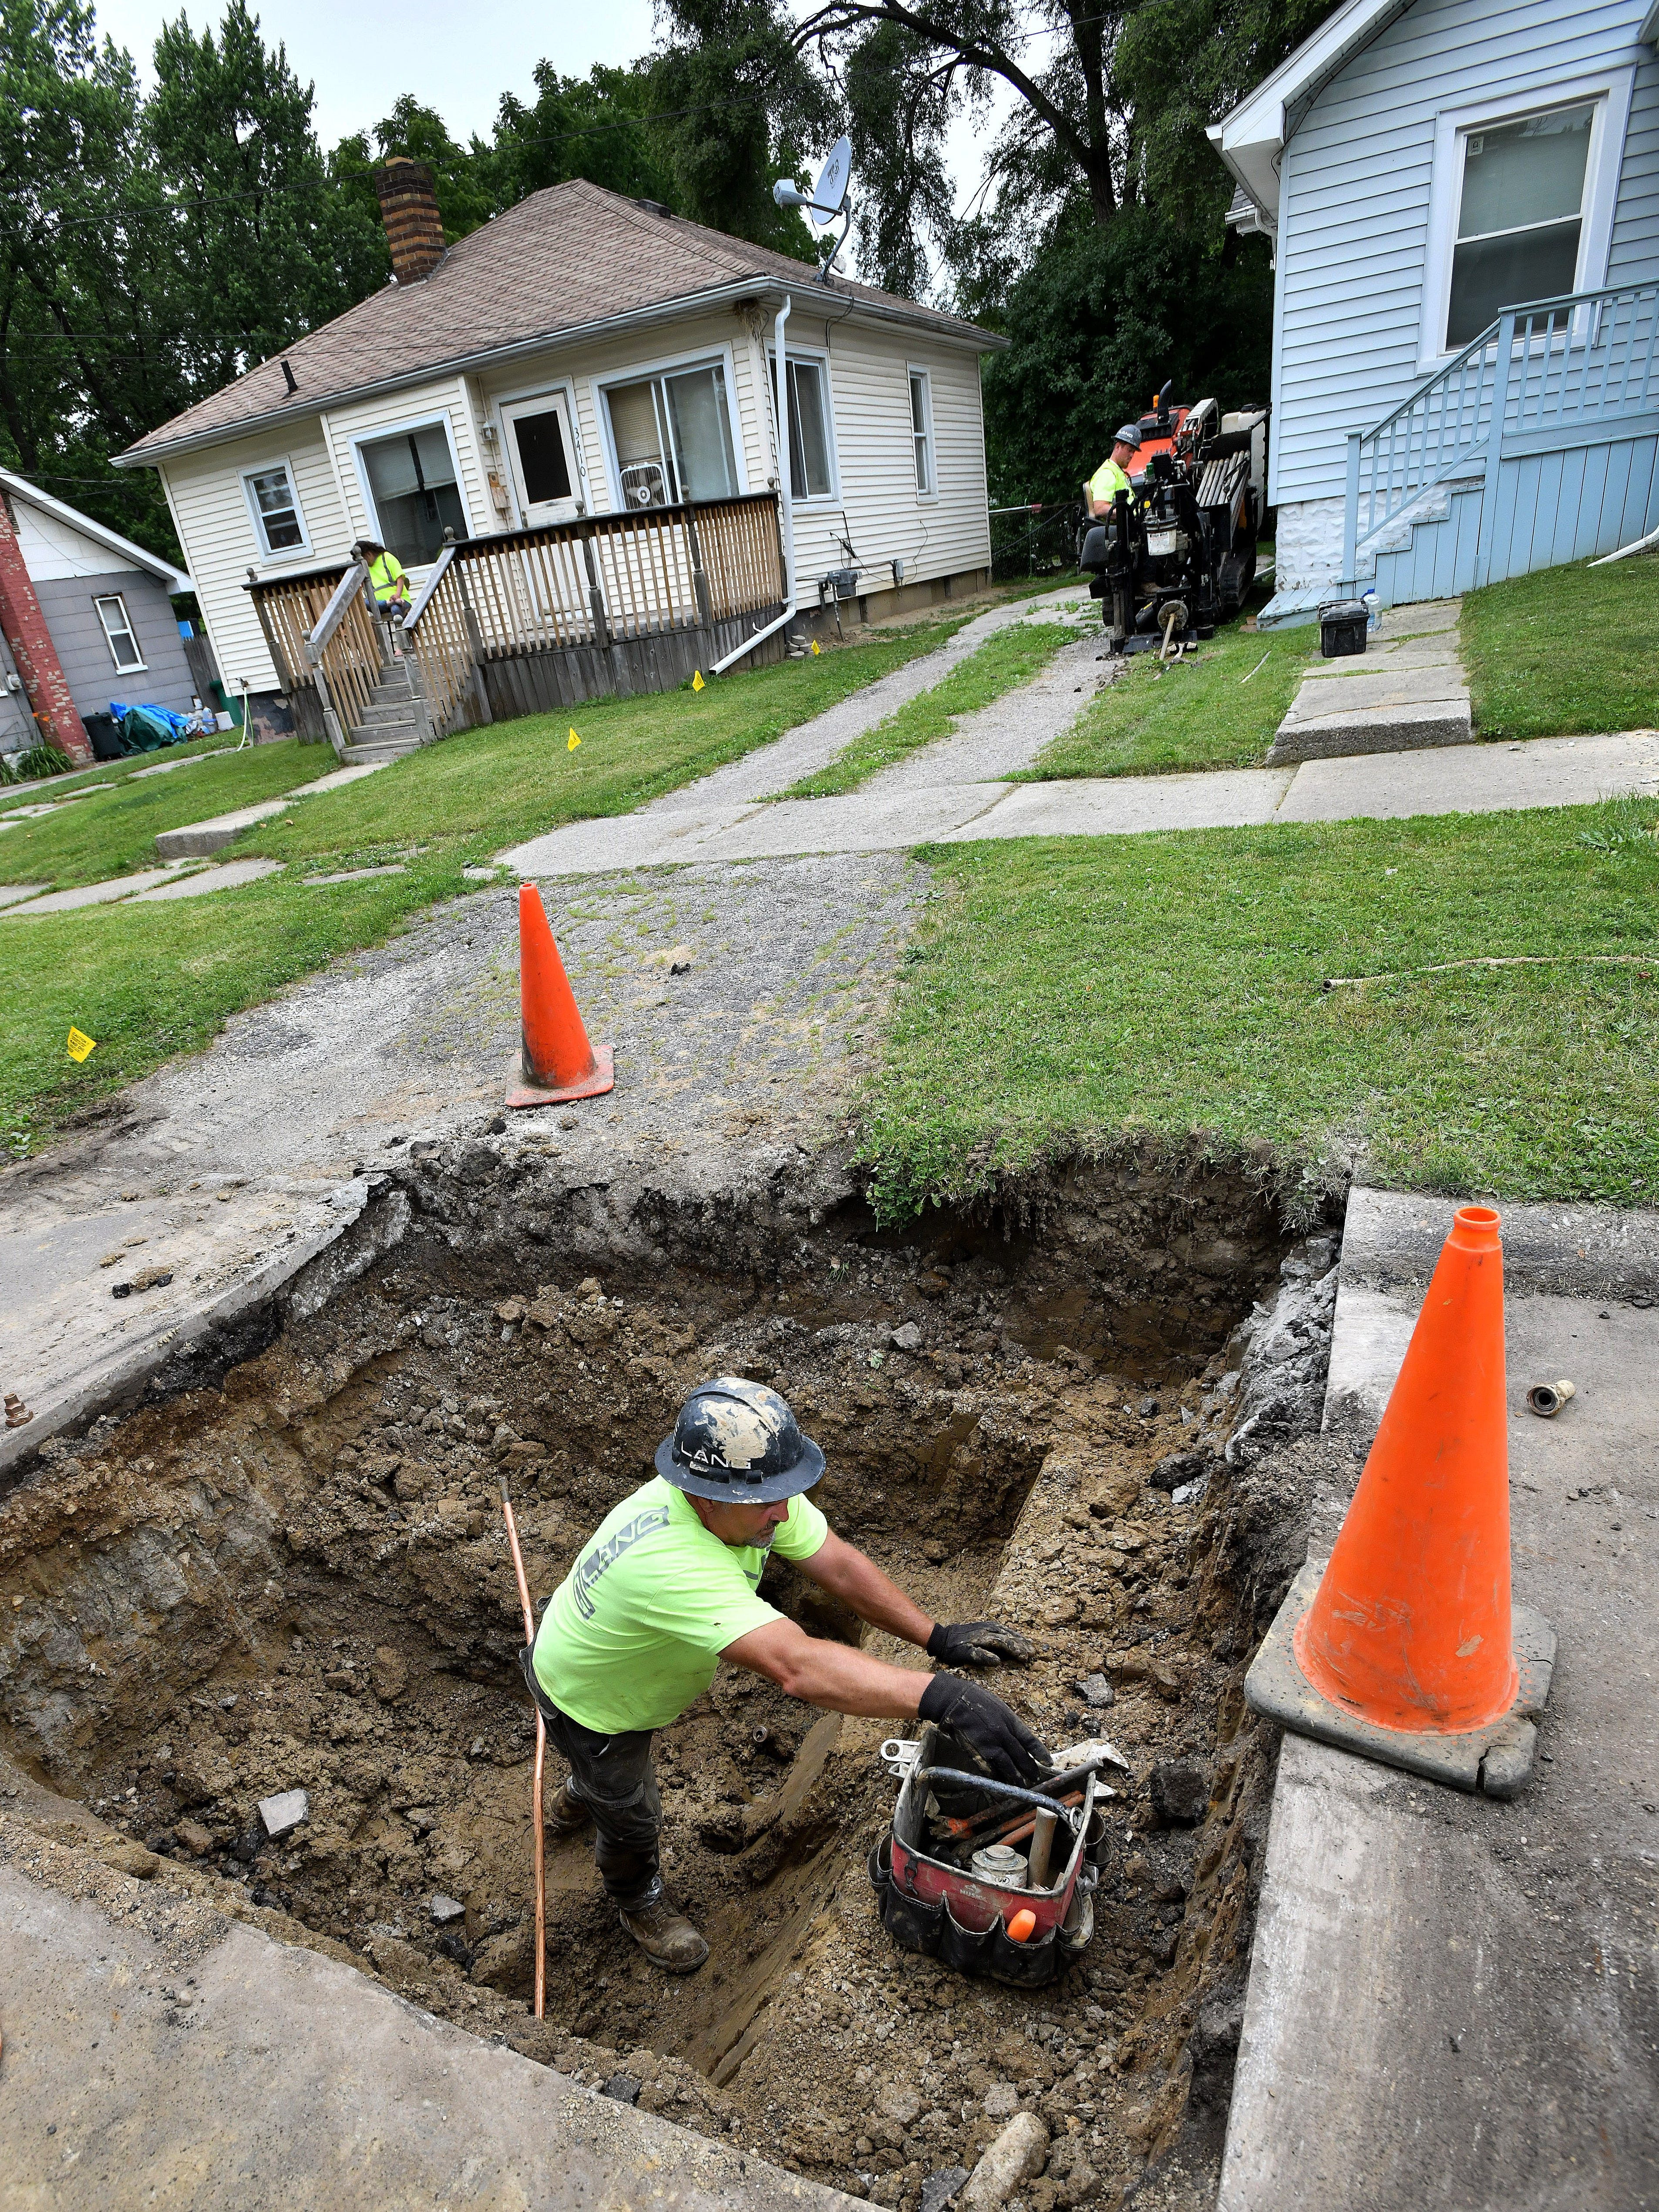 A worker from Lang Construction wrenches fittings in place for new copper pipe as they replace water lines on Arlene Street in Flint.